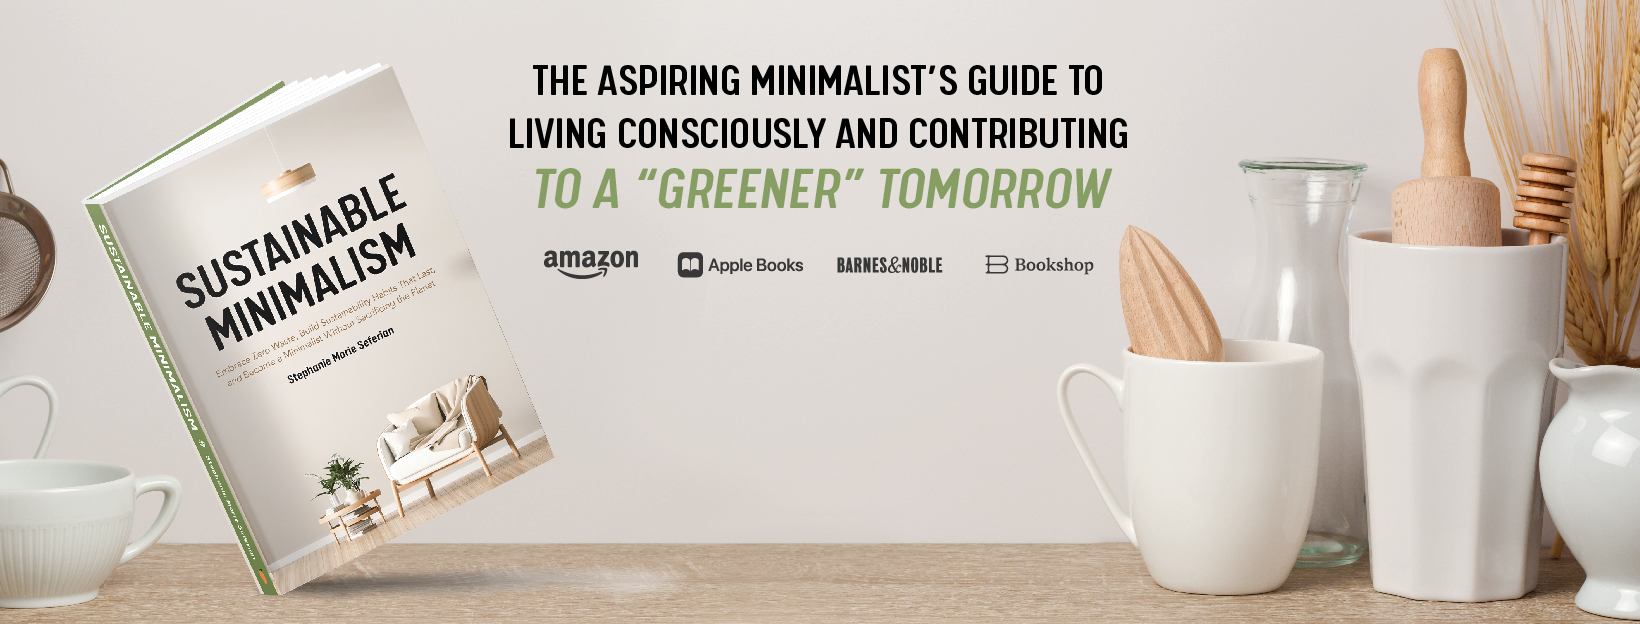 SustainableMinimalism (the book!) is available for purchase now!